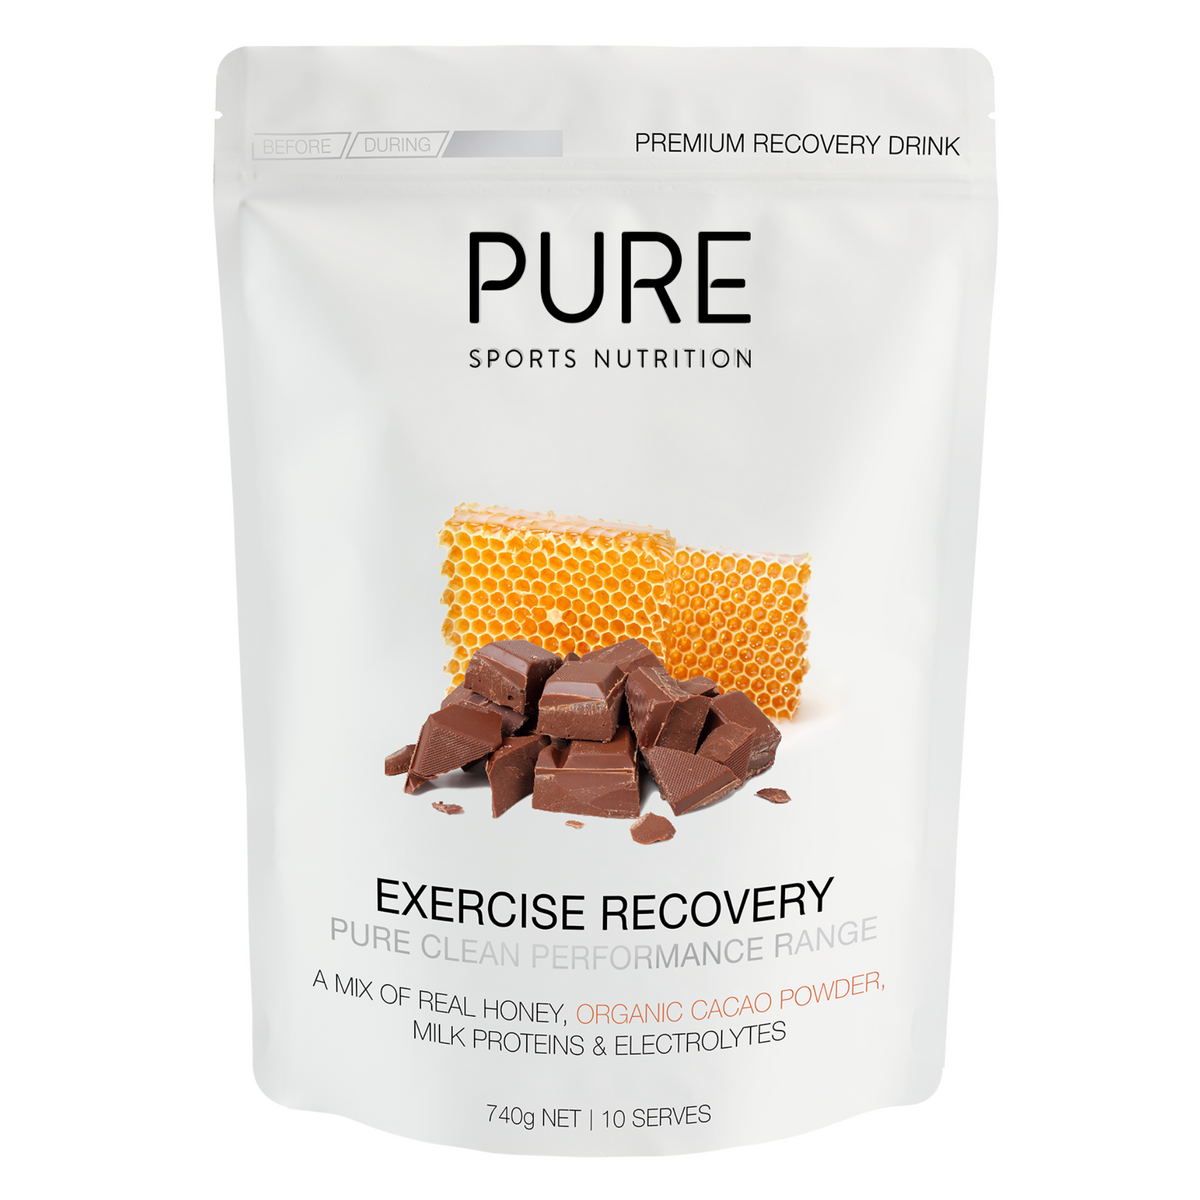 Pure Sports Nutrition Exercise Recovery in organic cacao powder